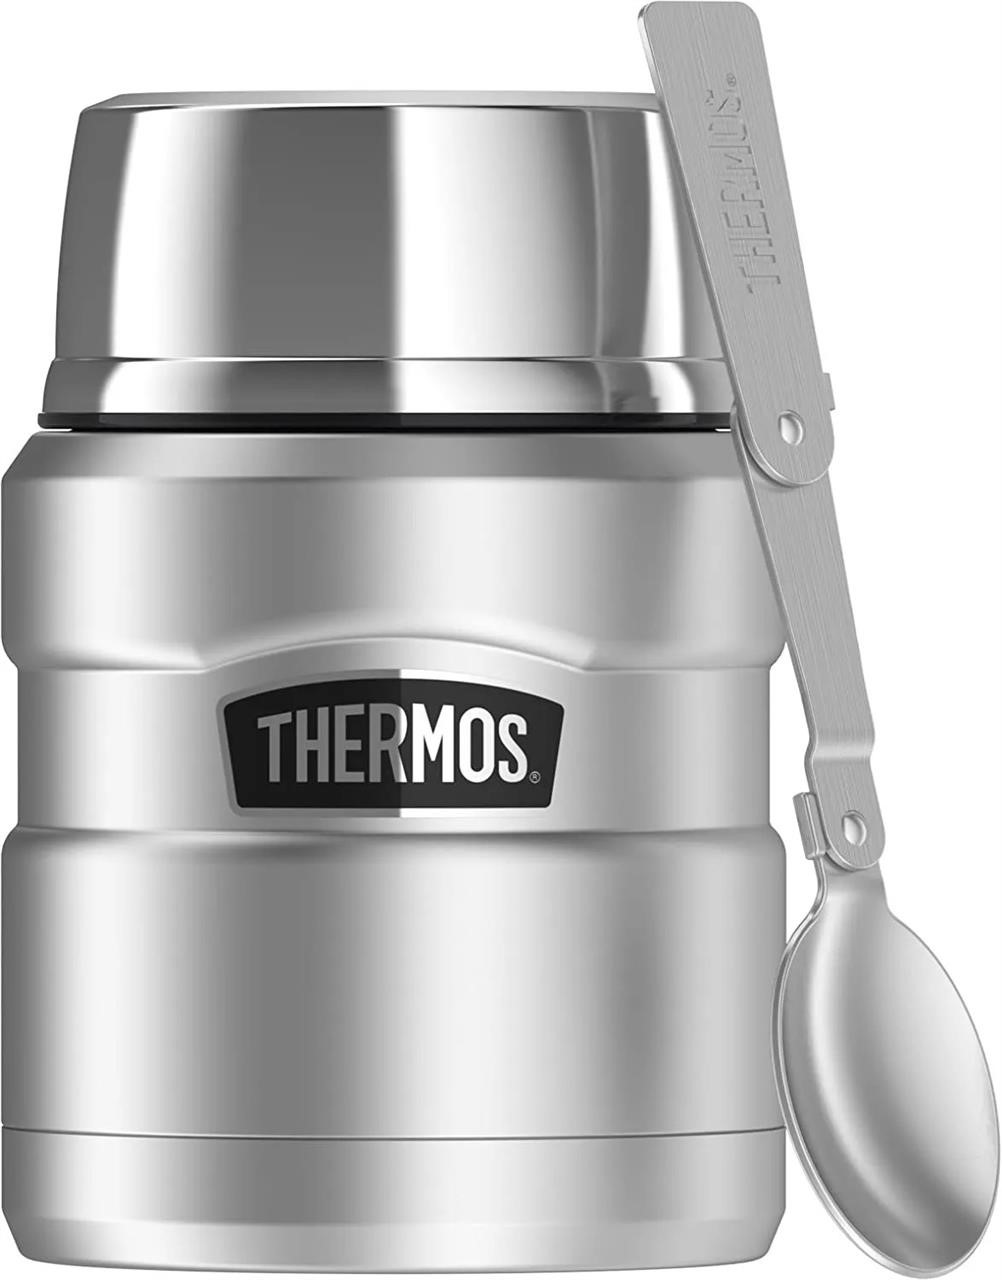 Thermos Stainless King 16 oz Food Jar With Spoon